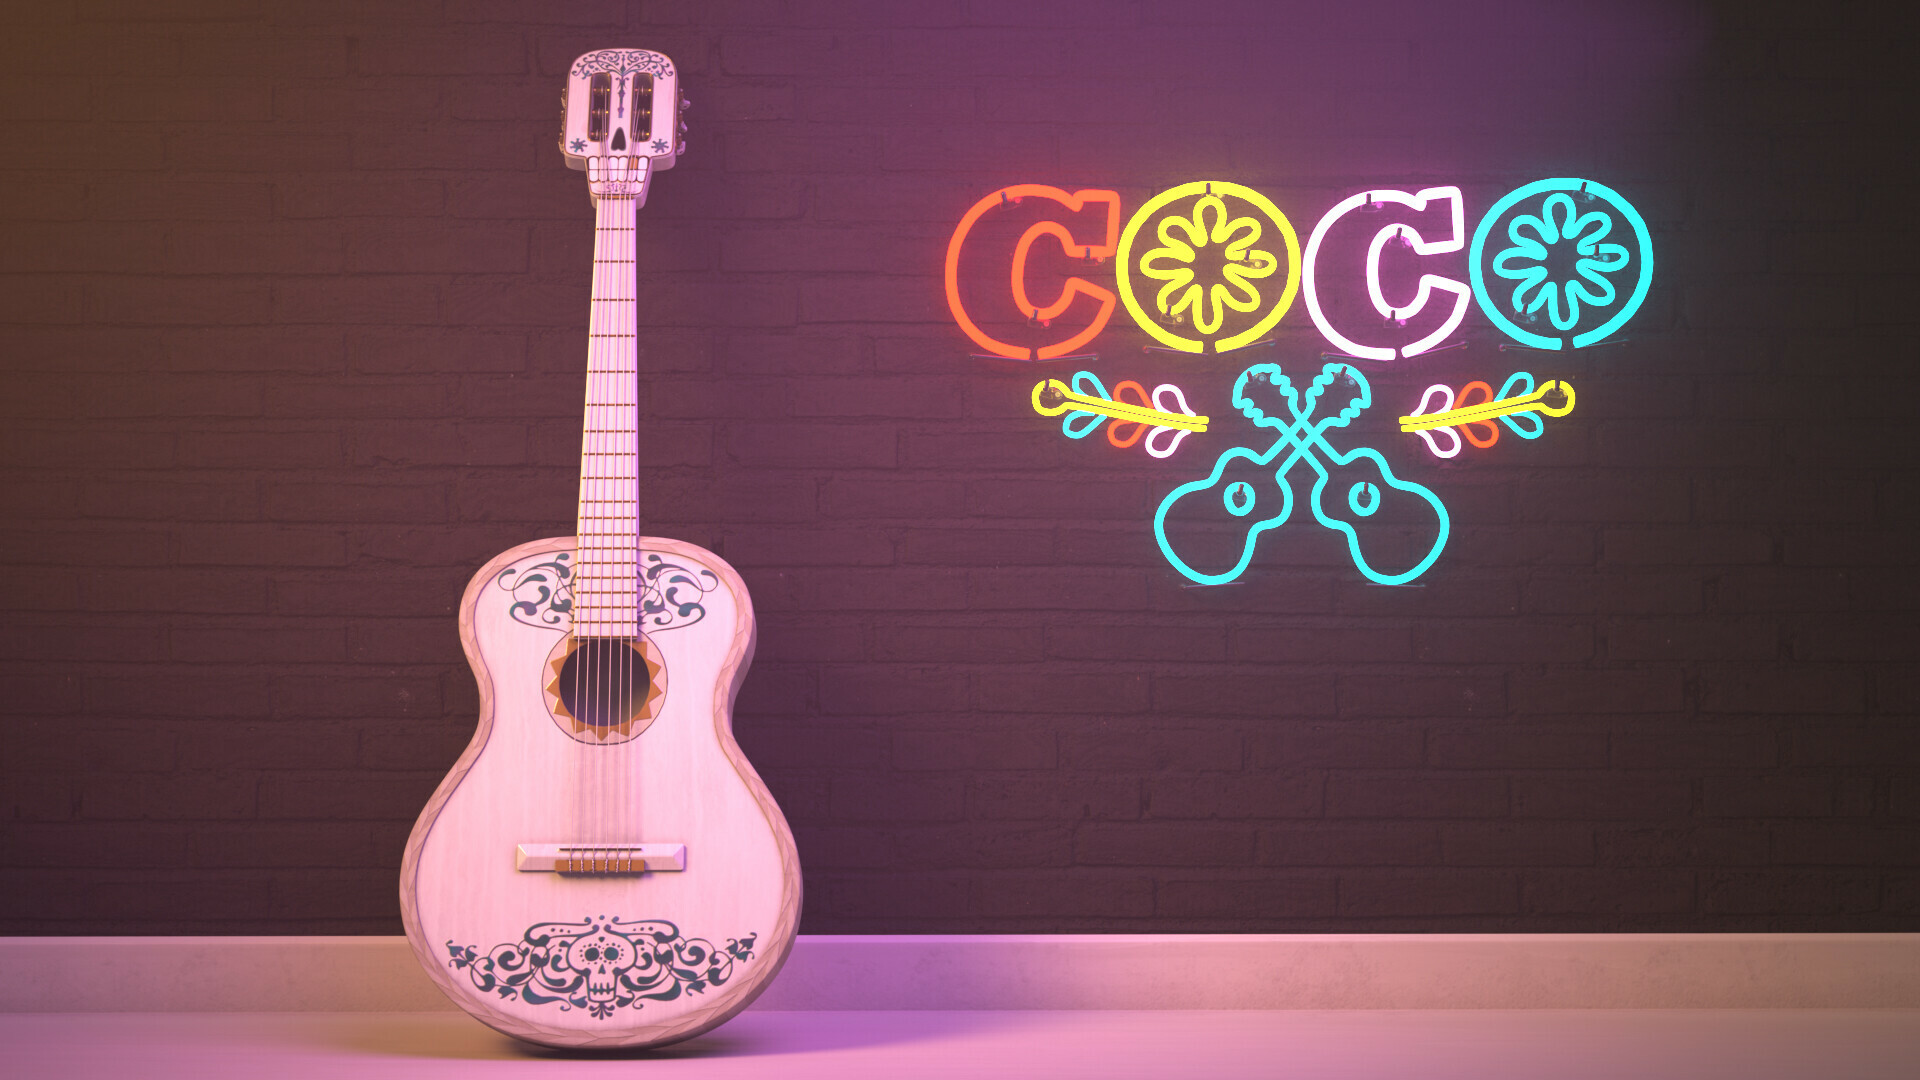 Coco (Cartoon): Miguel's guitar from Pixar's 2017 movie. 1920x1080 Full HD Background.